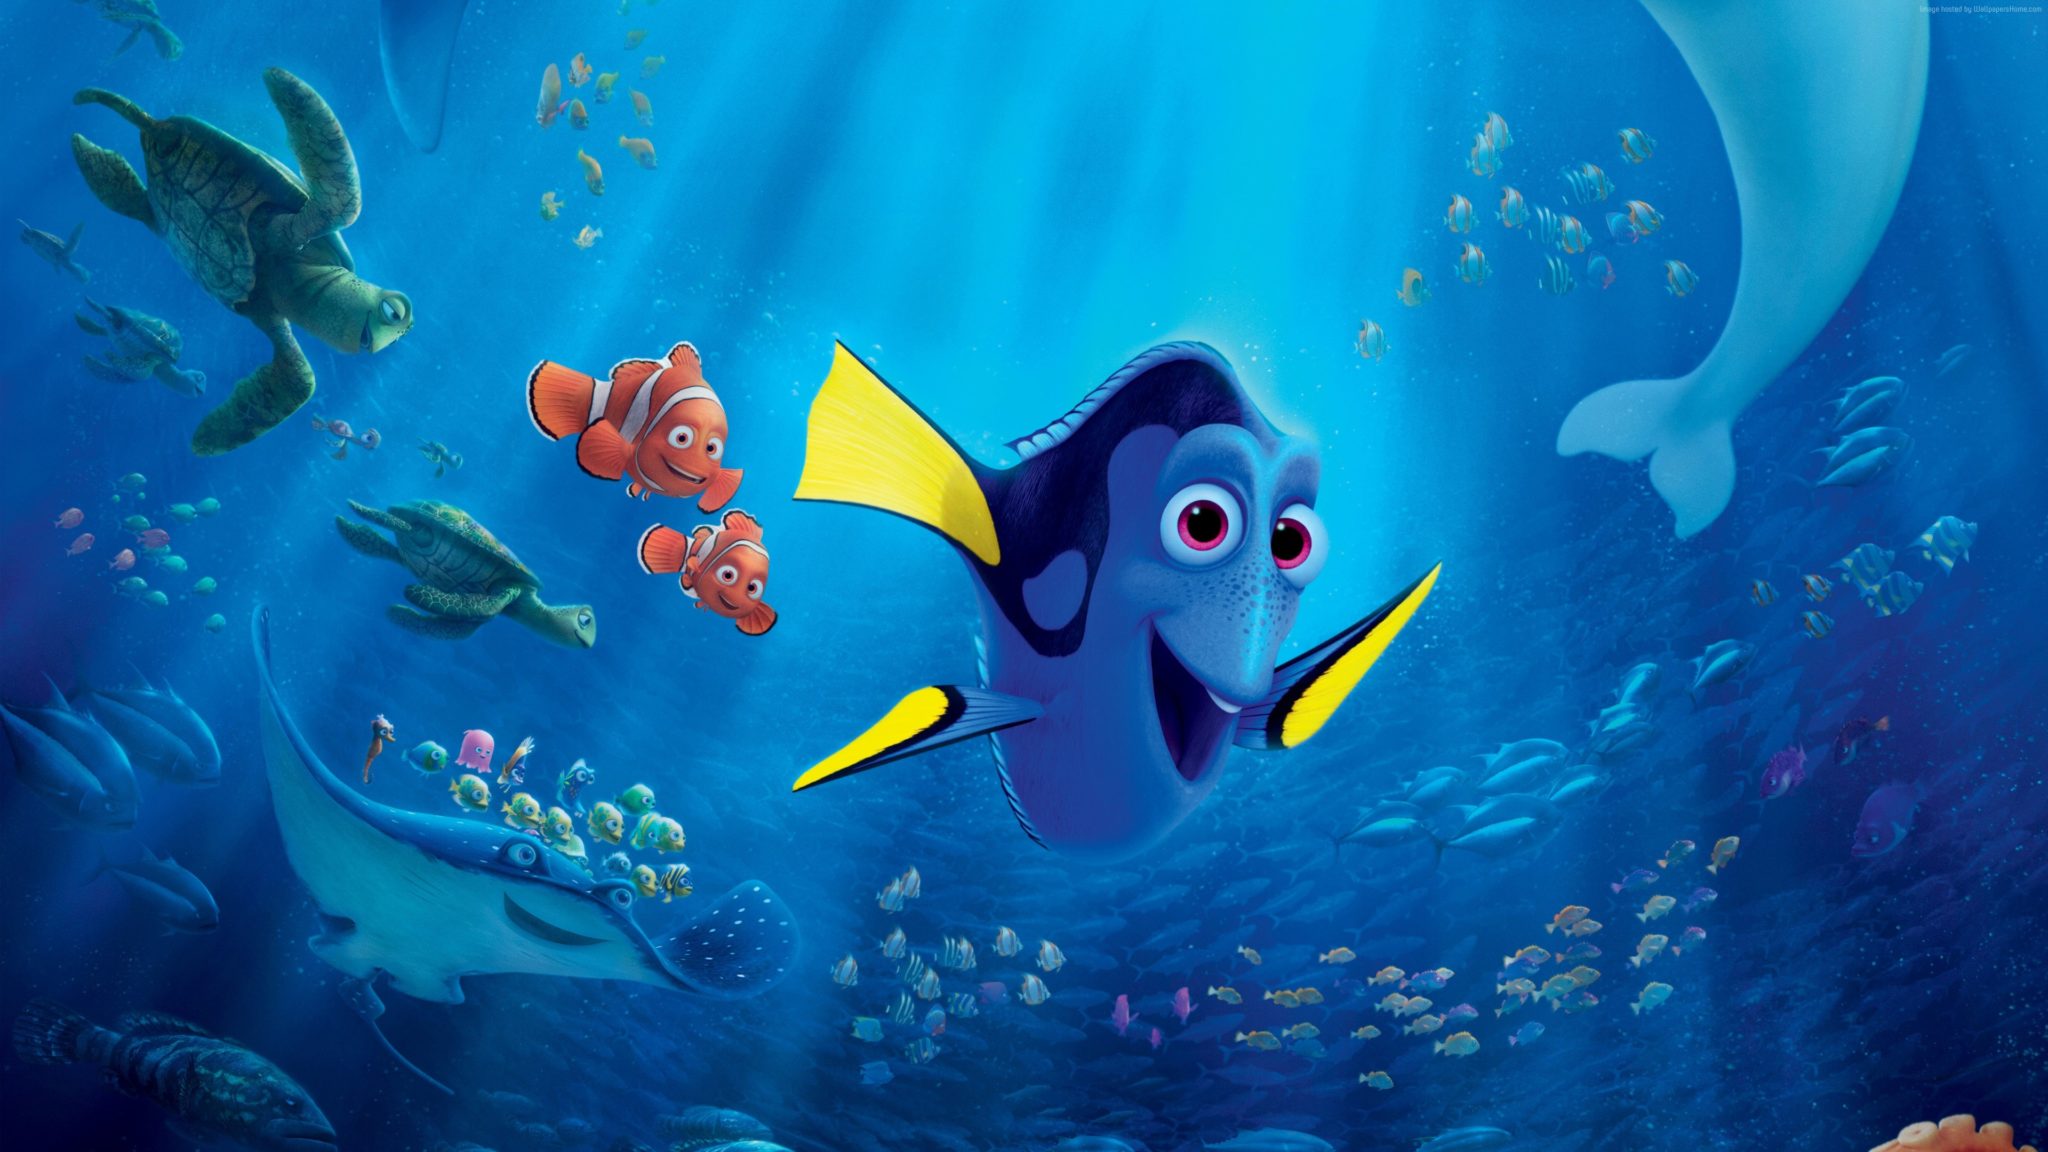 Finding Dory earns over 1 Billion dollars in theater sales